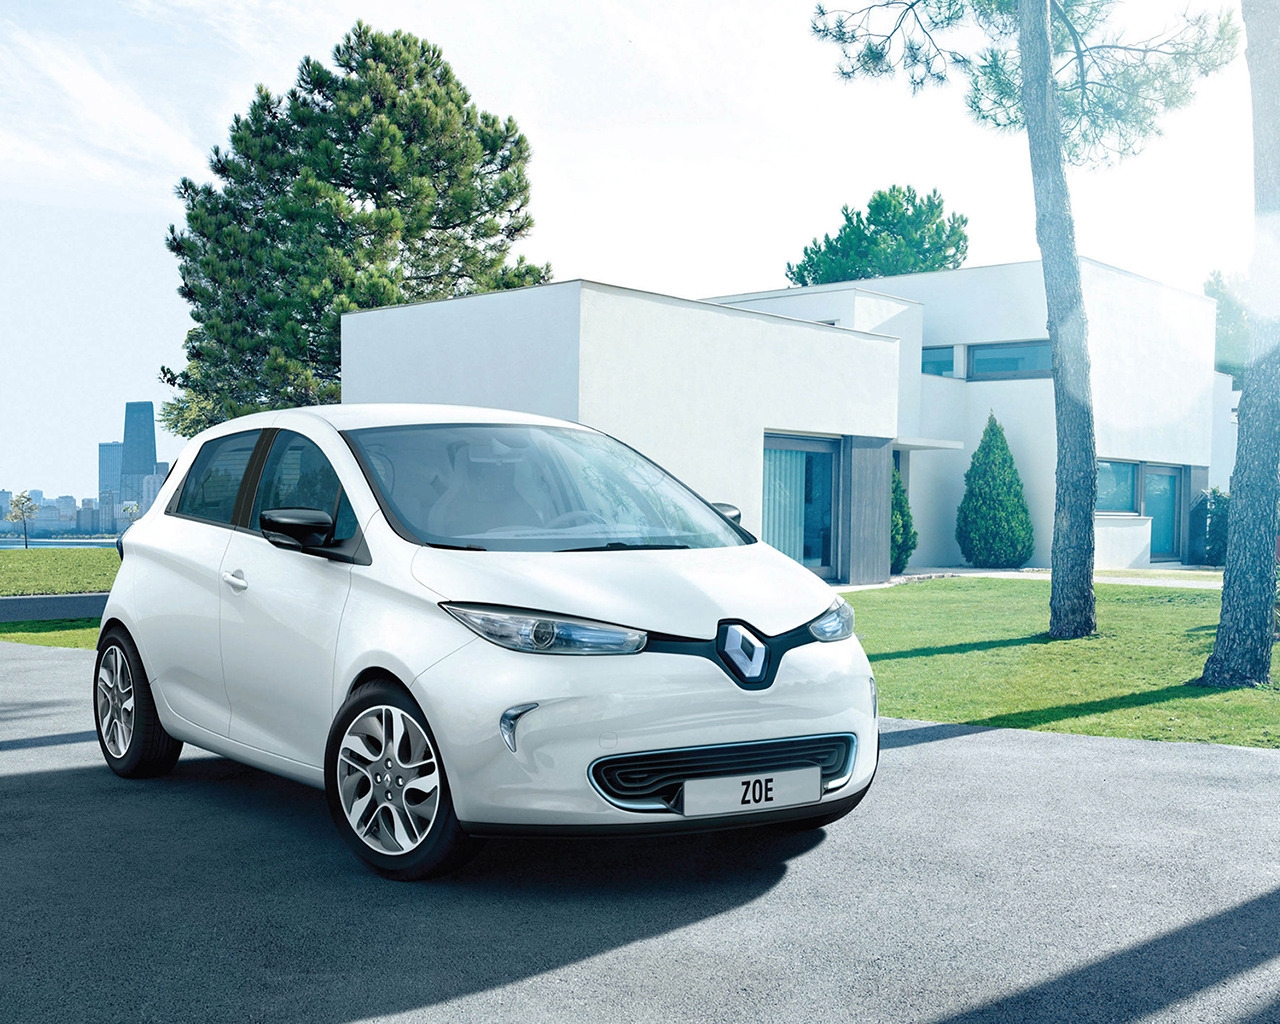 2013 Renault Zoe for 1280 x 1024 resolution